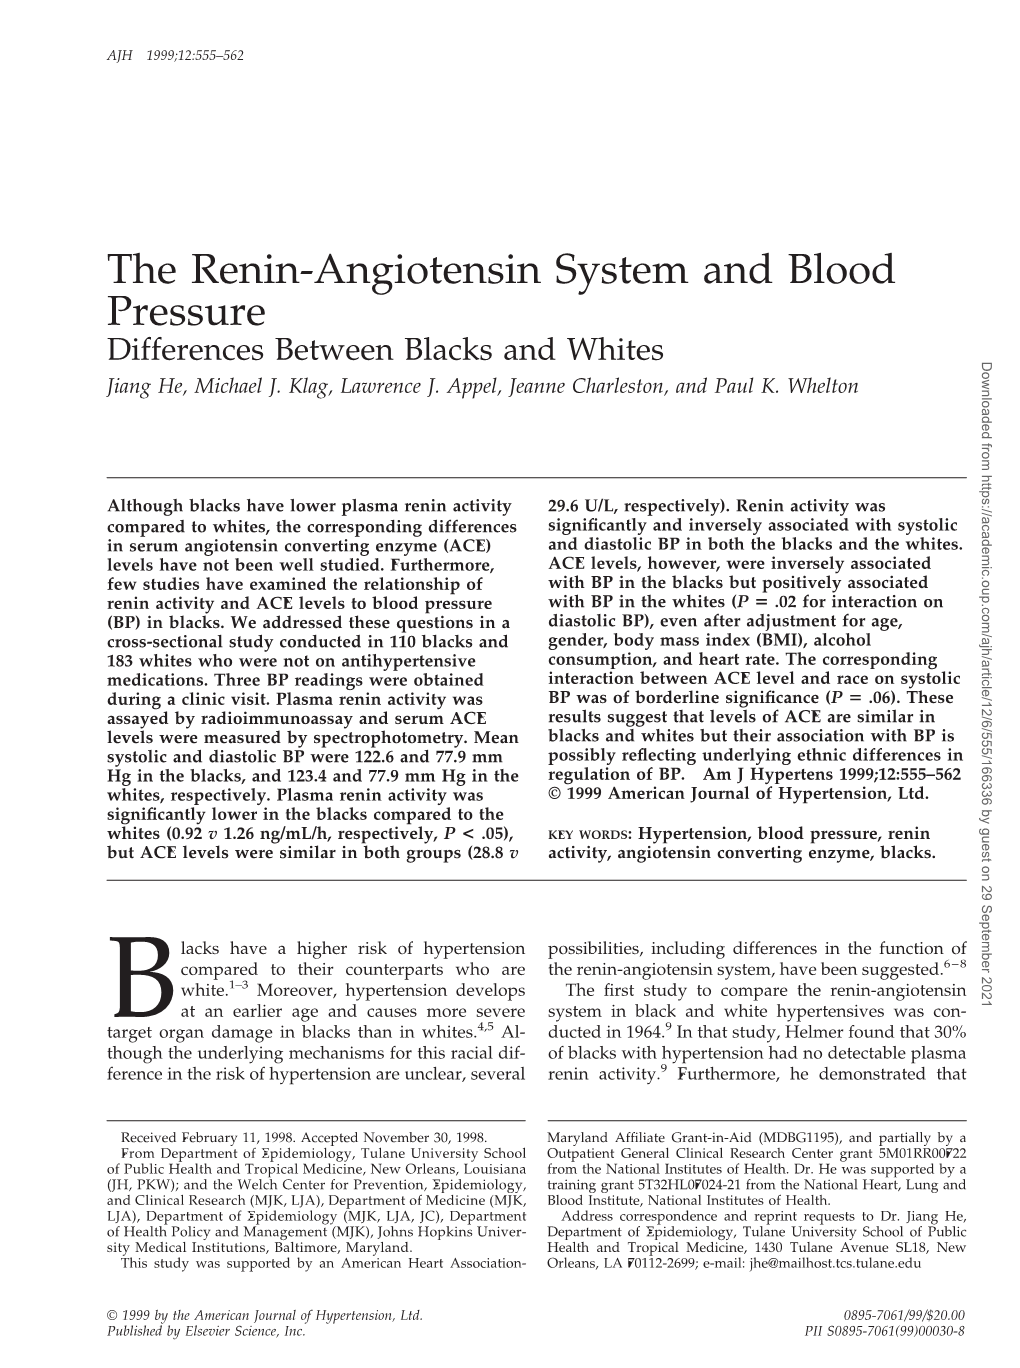 The Renin-Angiotensin System and Blood Pressure